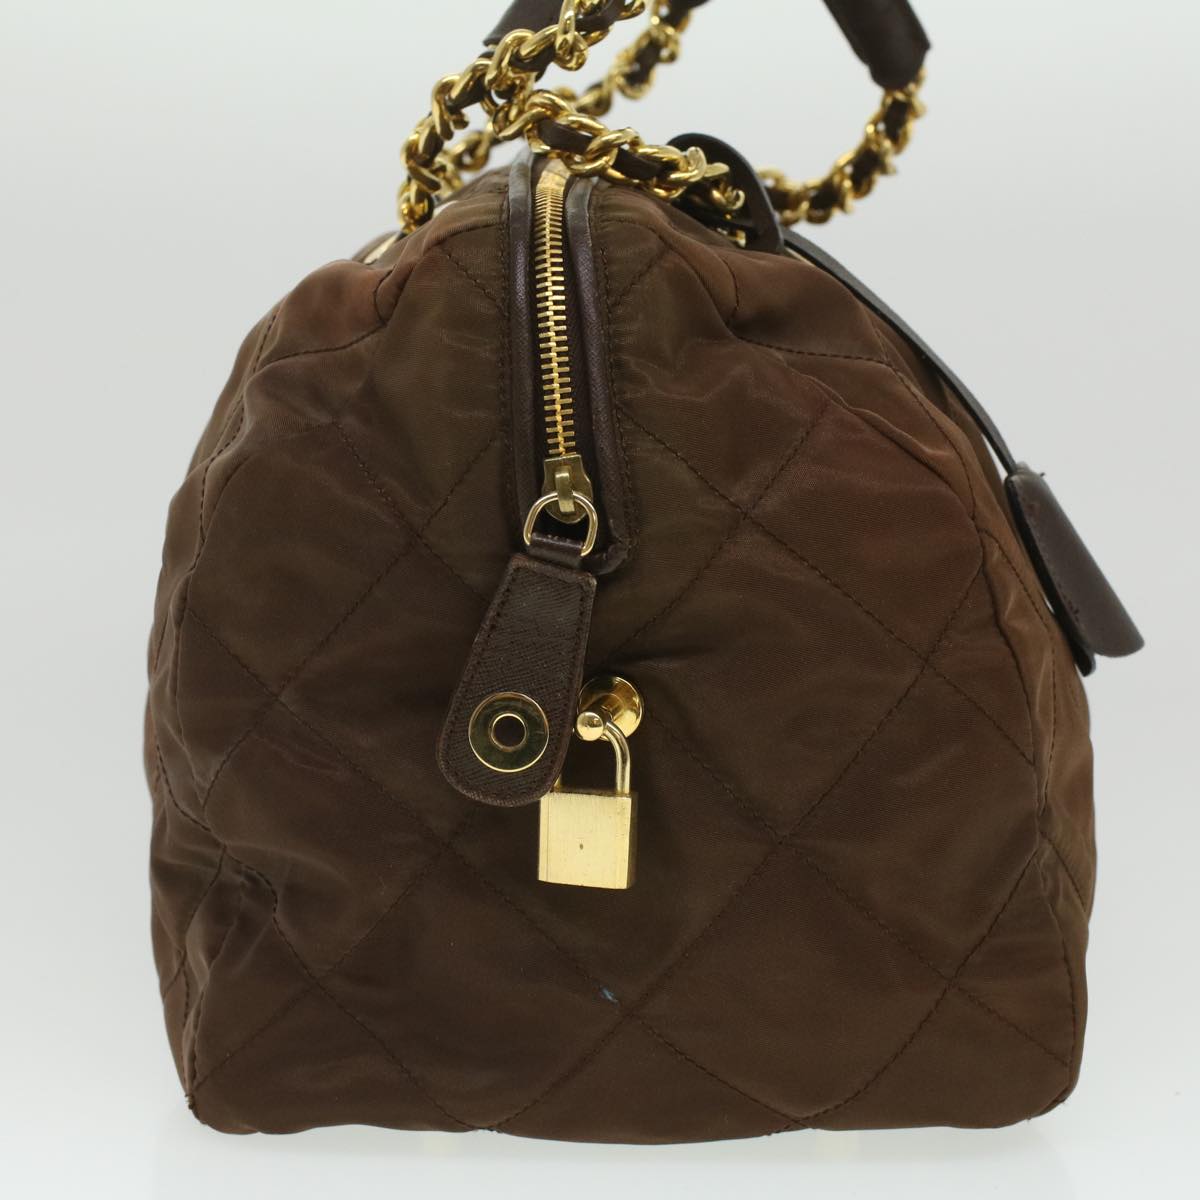 PRADA Quilted Chain Hand Bag Nylon Brown Auth 36963